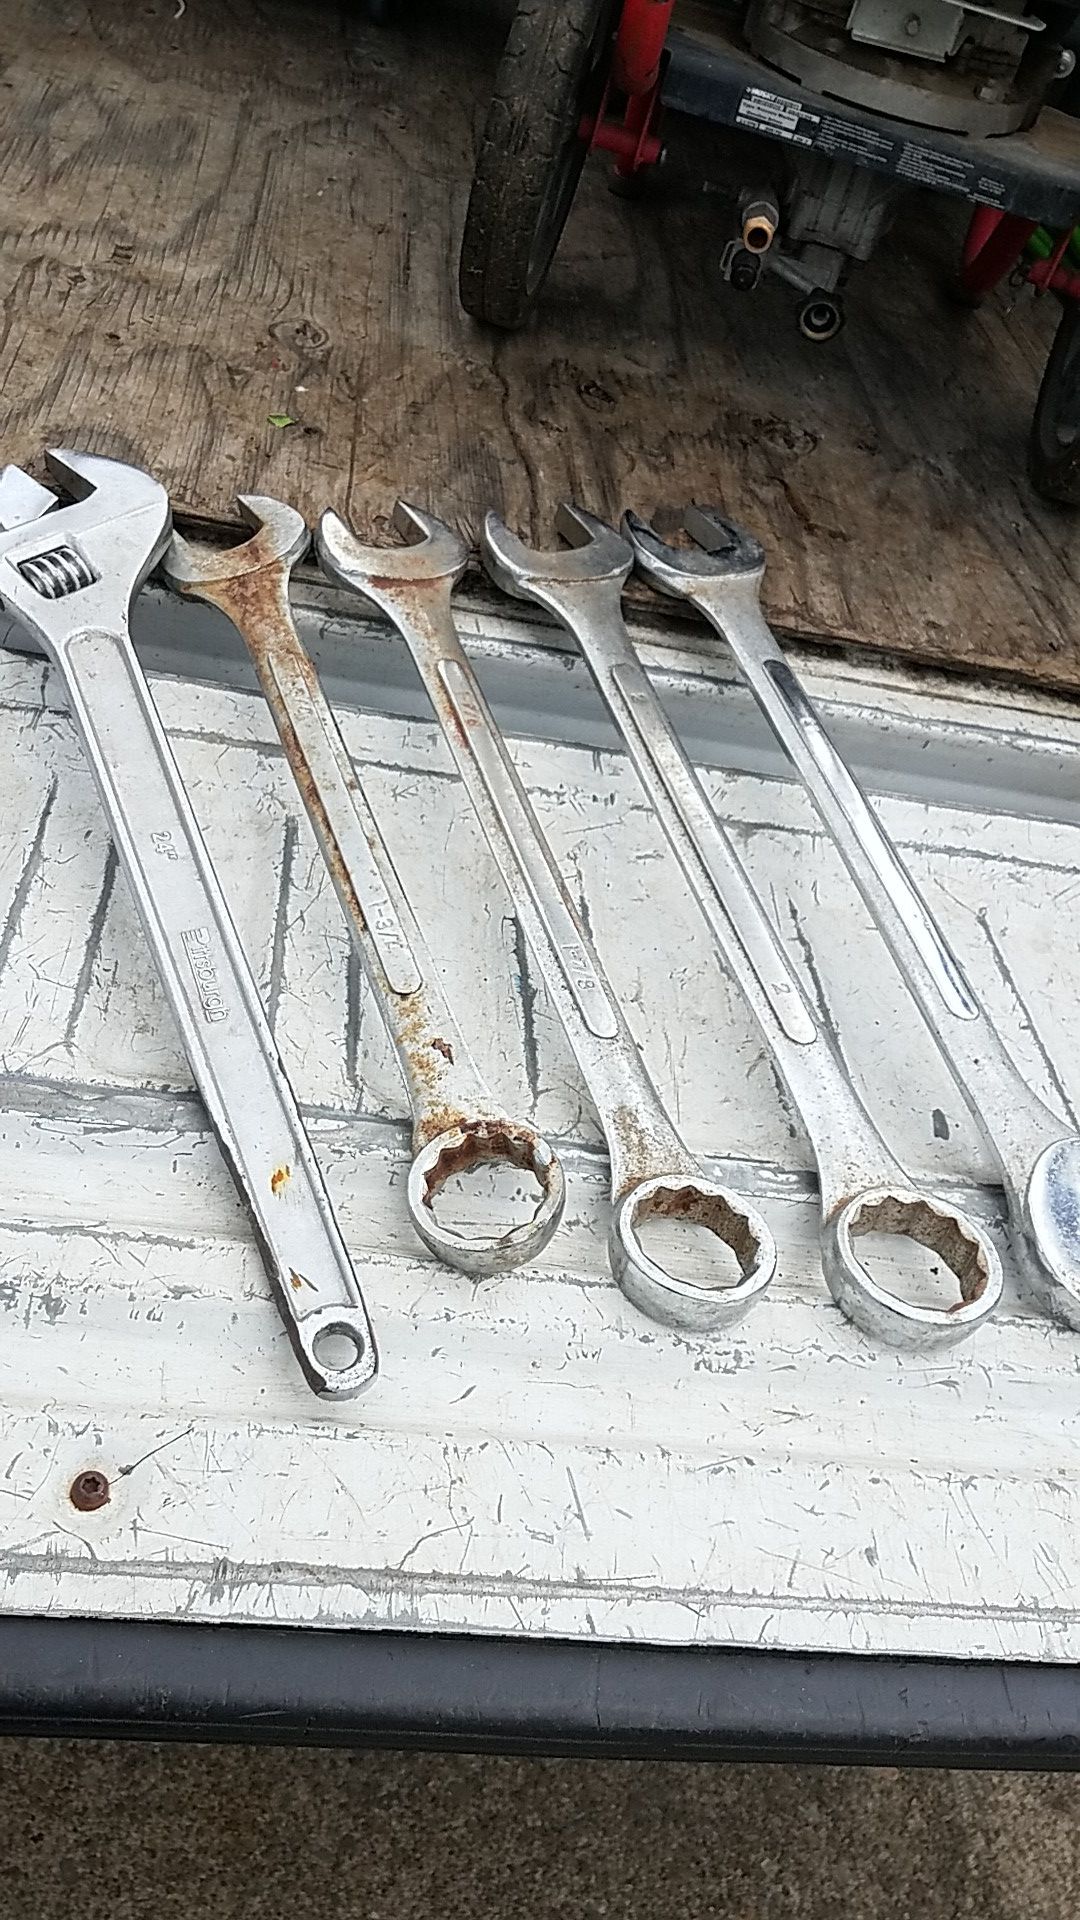 5 large wrenches